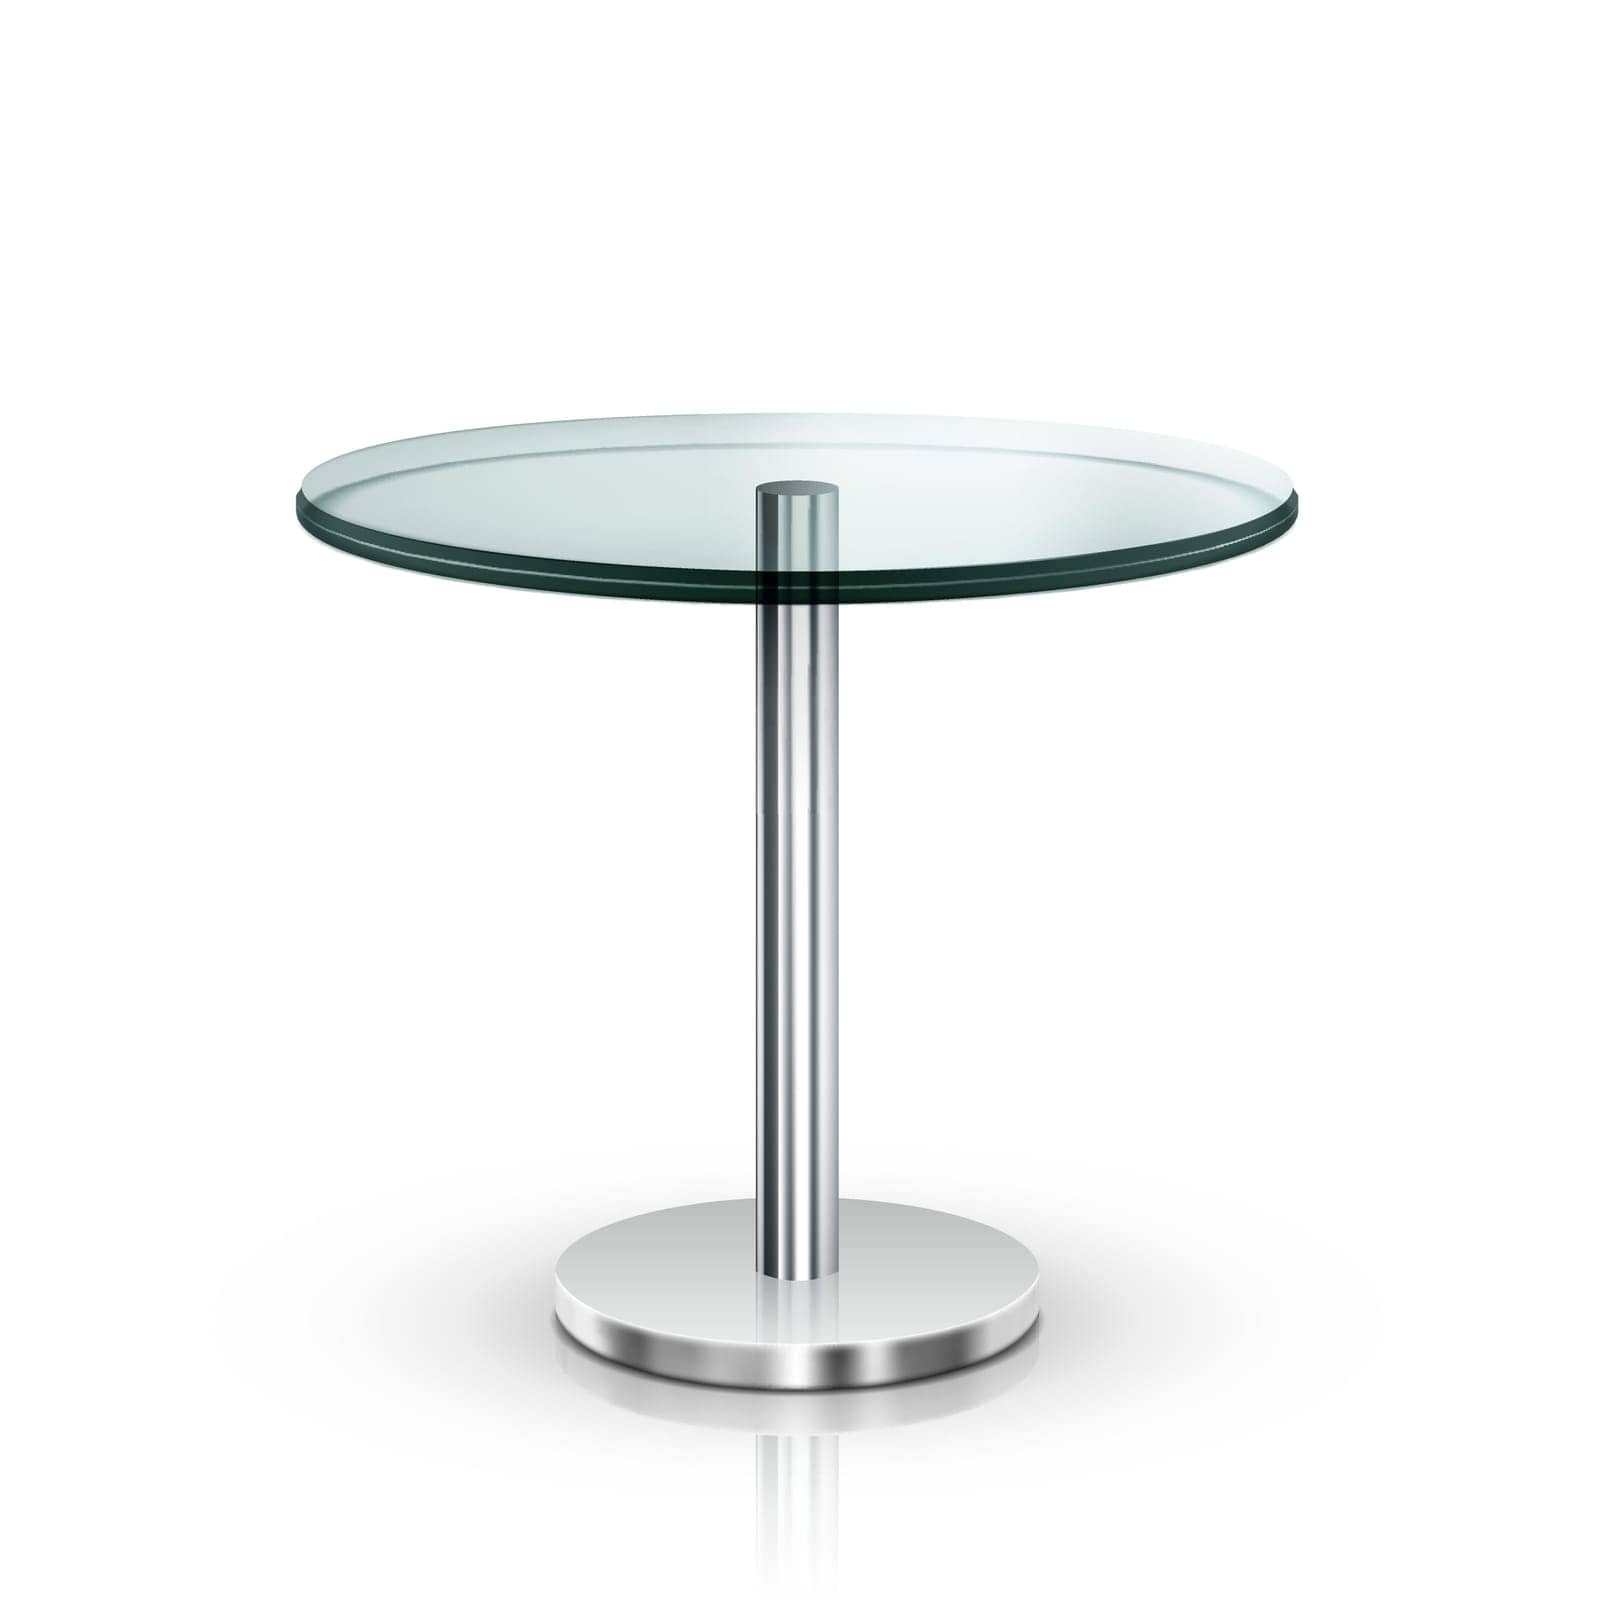 Empty Glass Round Office Table On Metal Leg. EPS10 Vector